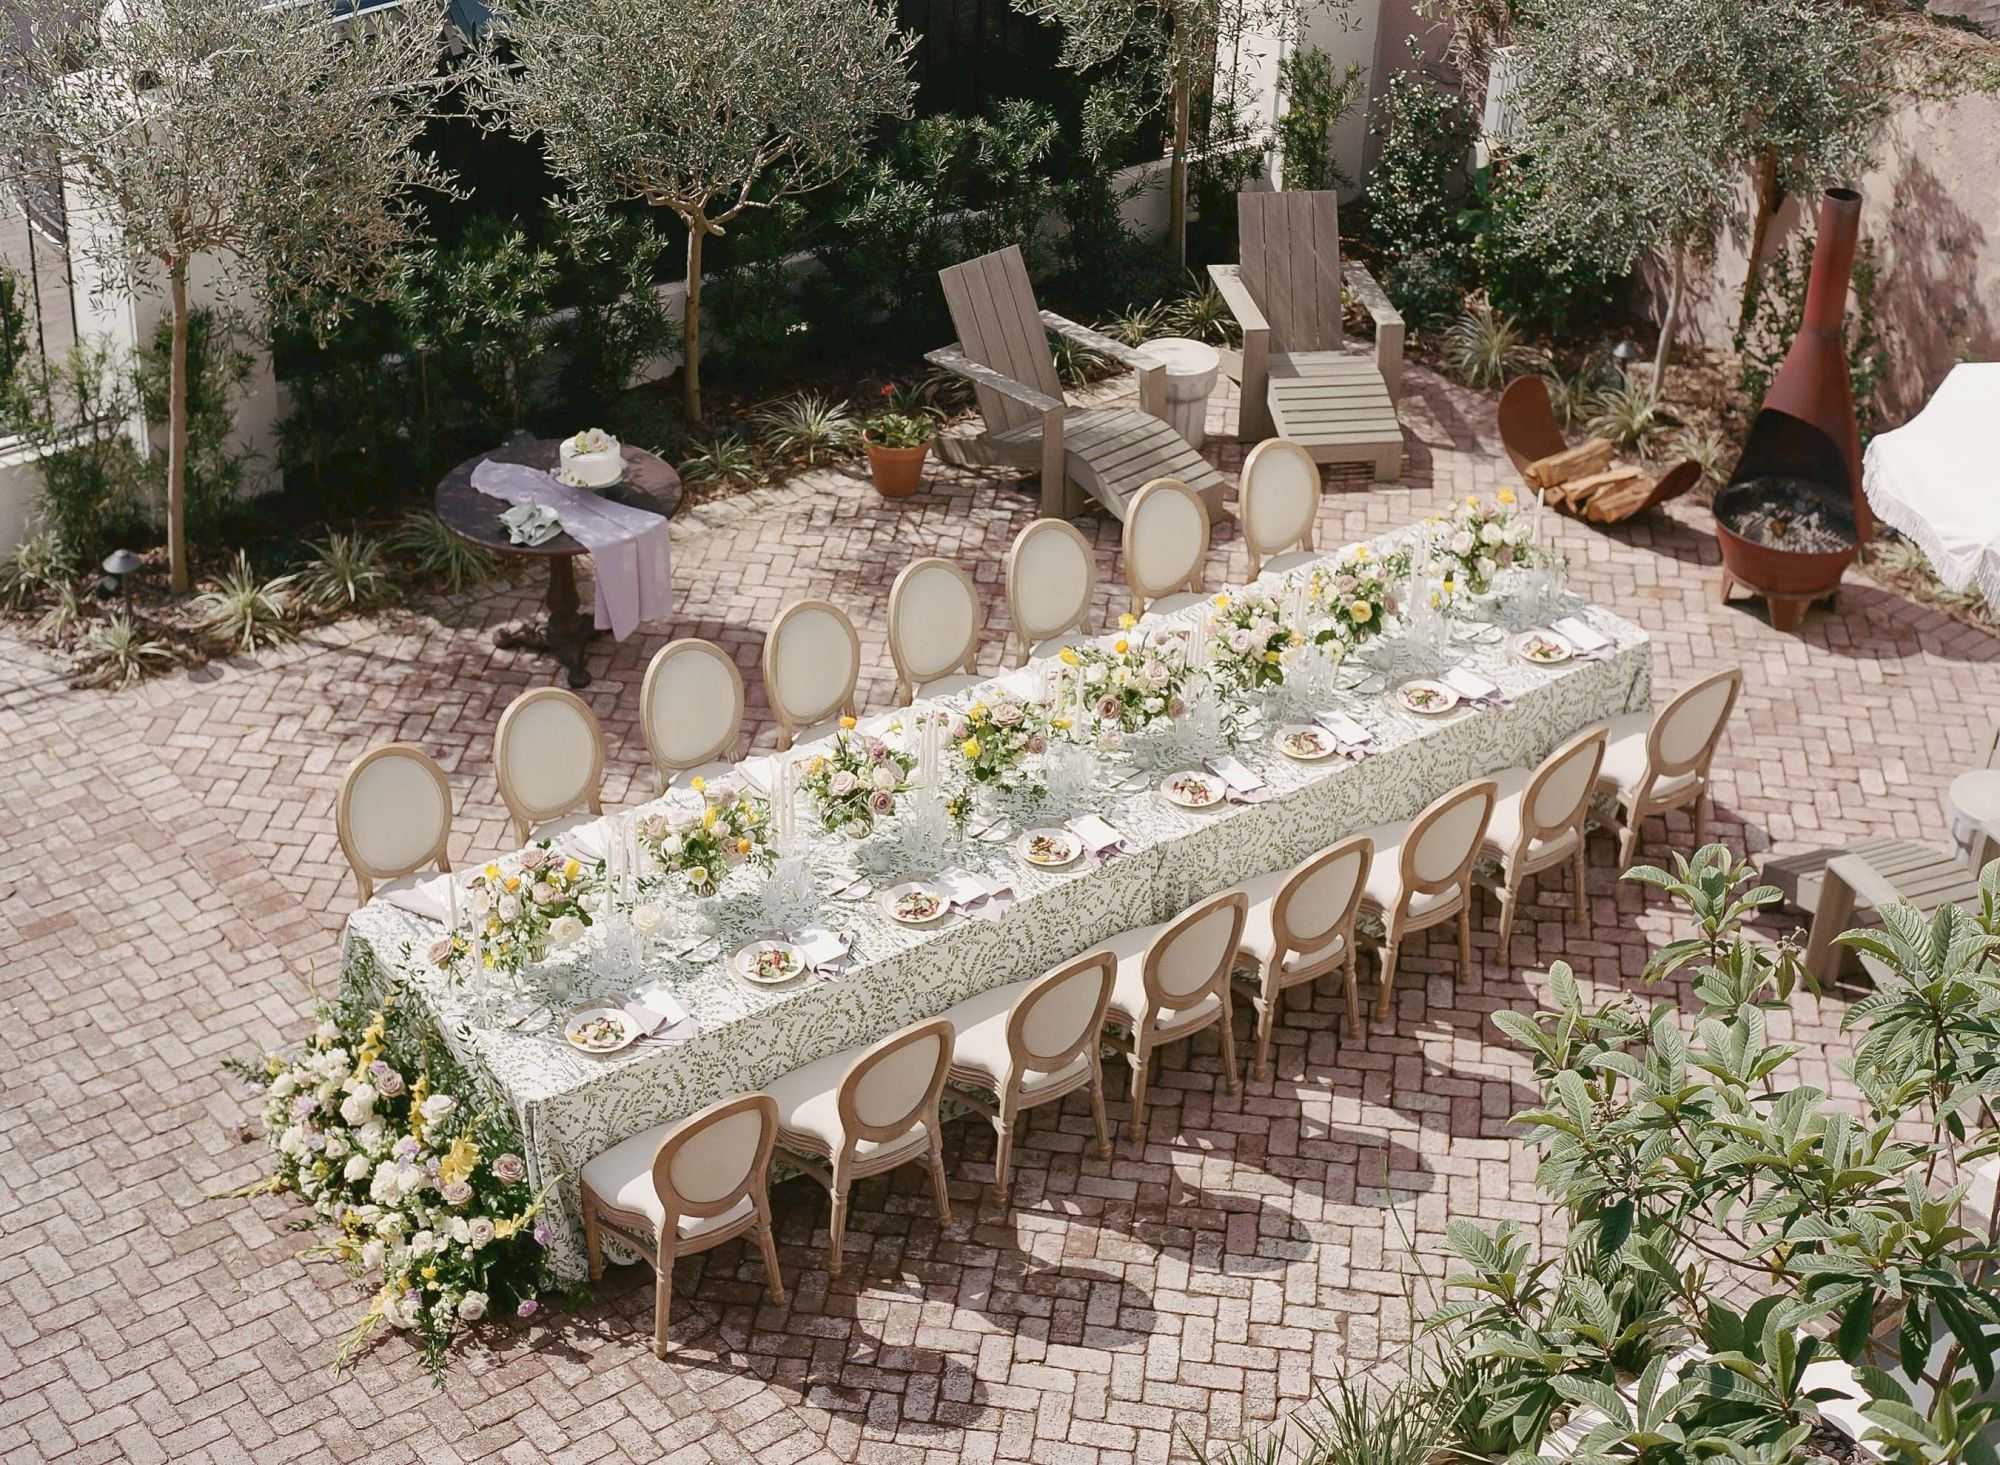 An outdoor dining setup with a long table, flower centerpieces, and 12 chairs, surrounded by greenery and garden furniture in a brick-paved area.